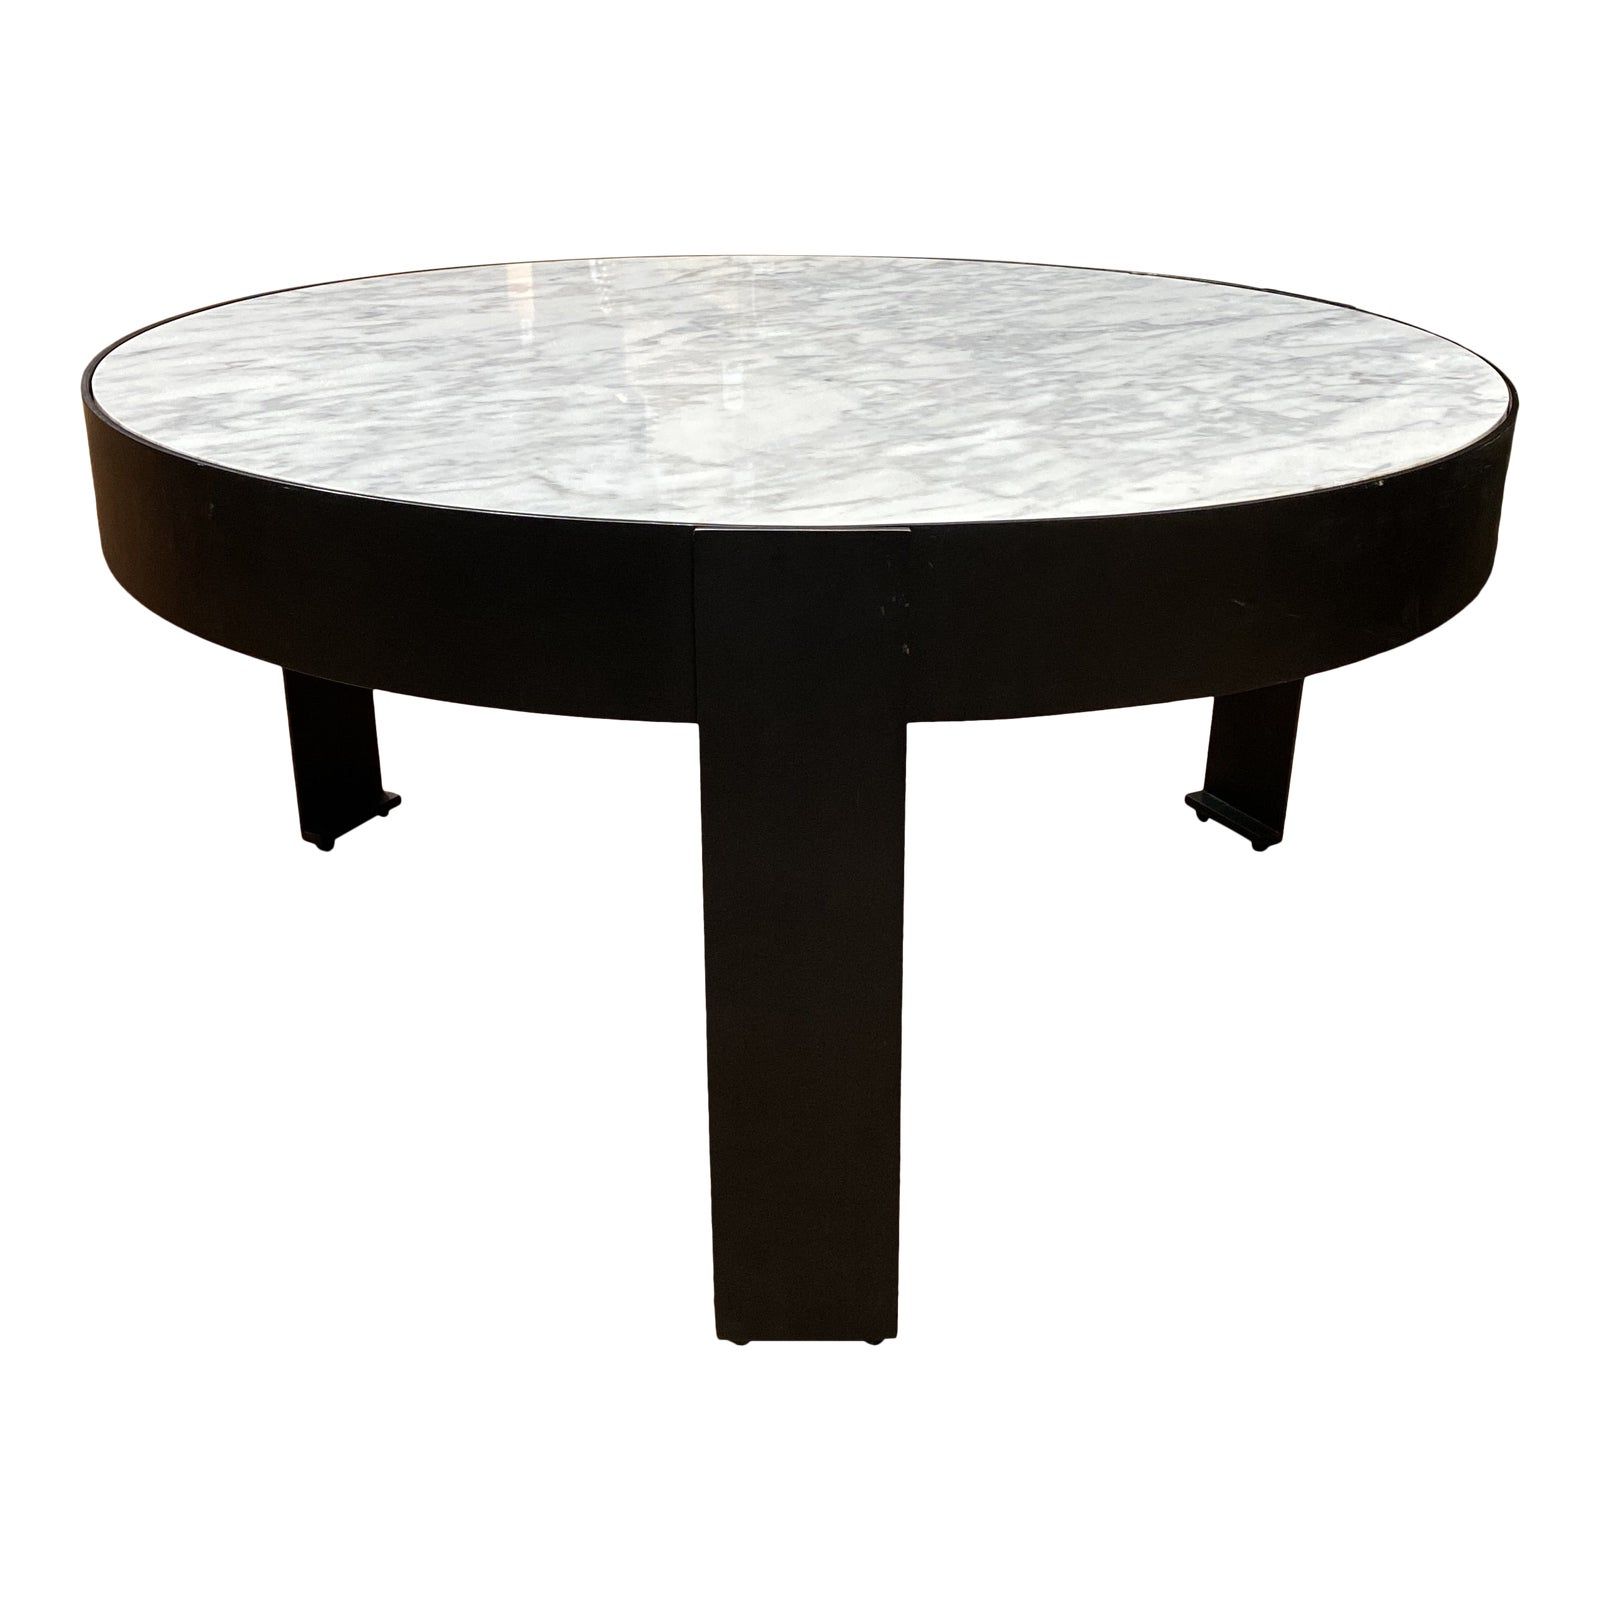 Widely Used Round Iron Coffee Tables Within New Kelly Wearstler Round White Marble + Iron Coffee Table (View 11 of 20)